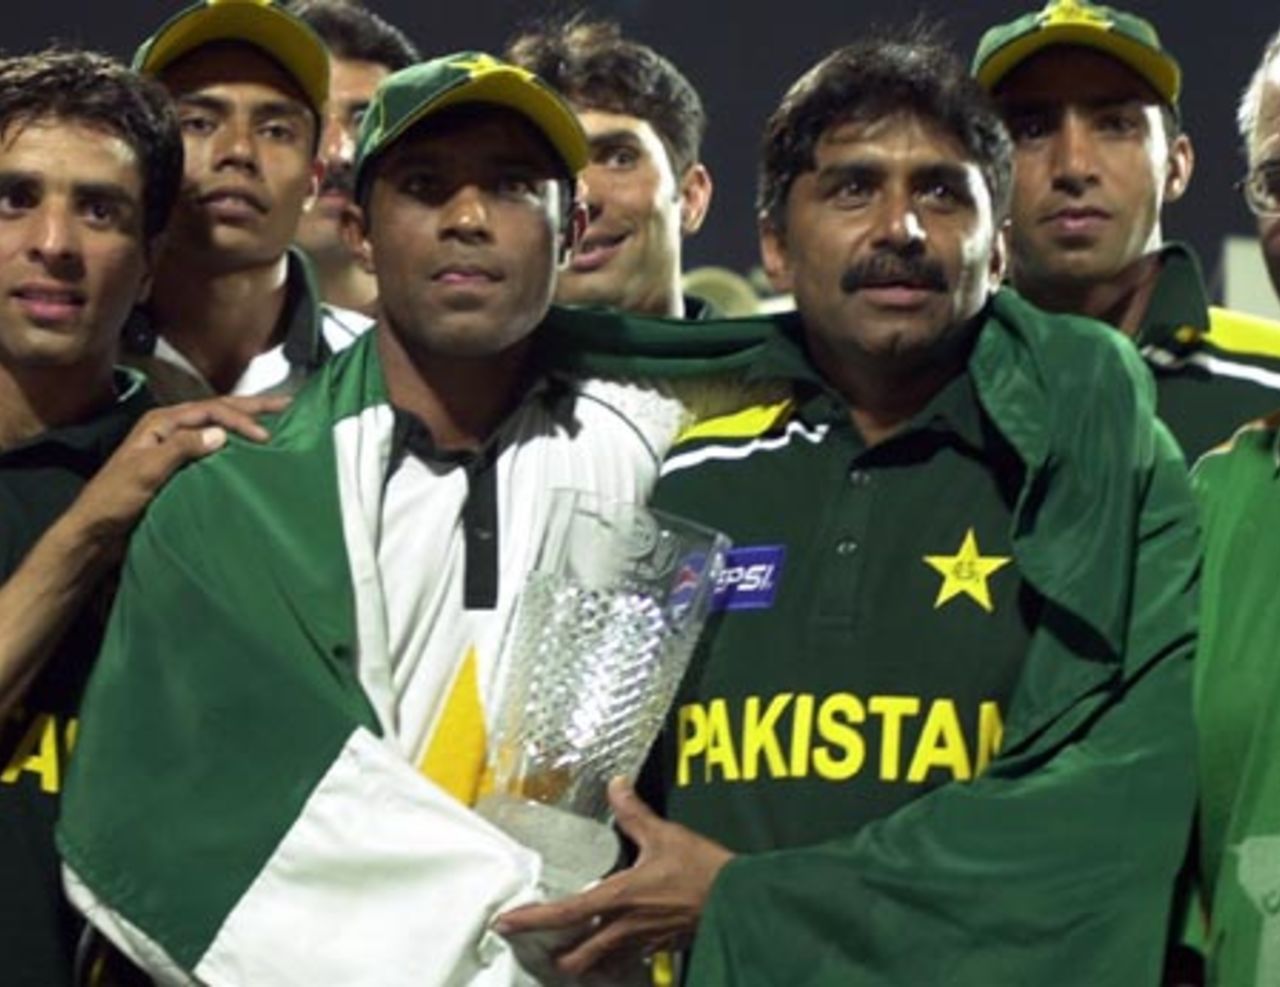 Pakistani Cricket team captain Rashid Latif (L) and coach Javed Miandad hold the Sharjah Cup 2003 togather after the final match after winning the Four Nation Sharjah Cricket Tournament, 10 April 2003